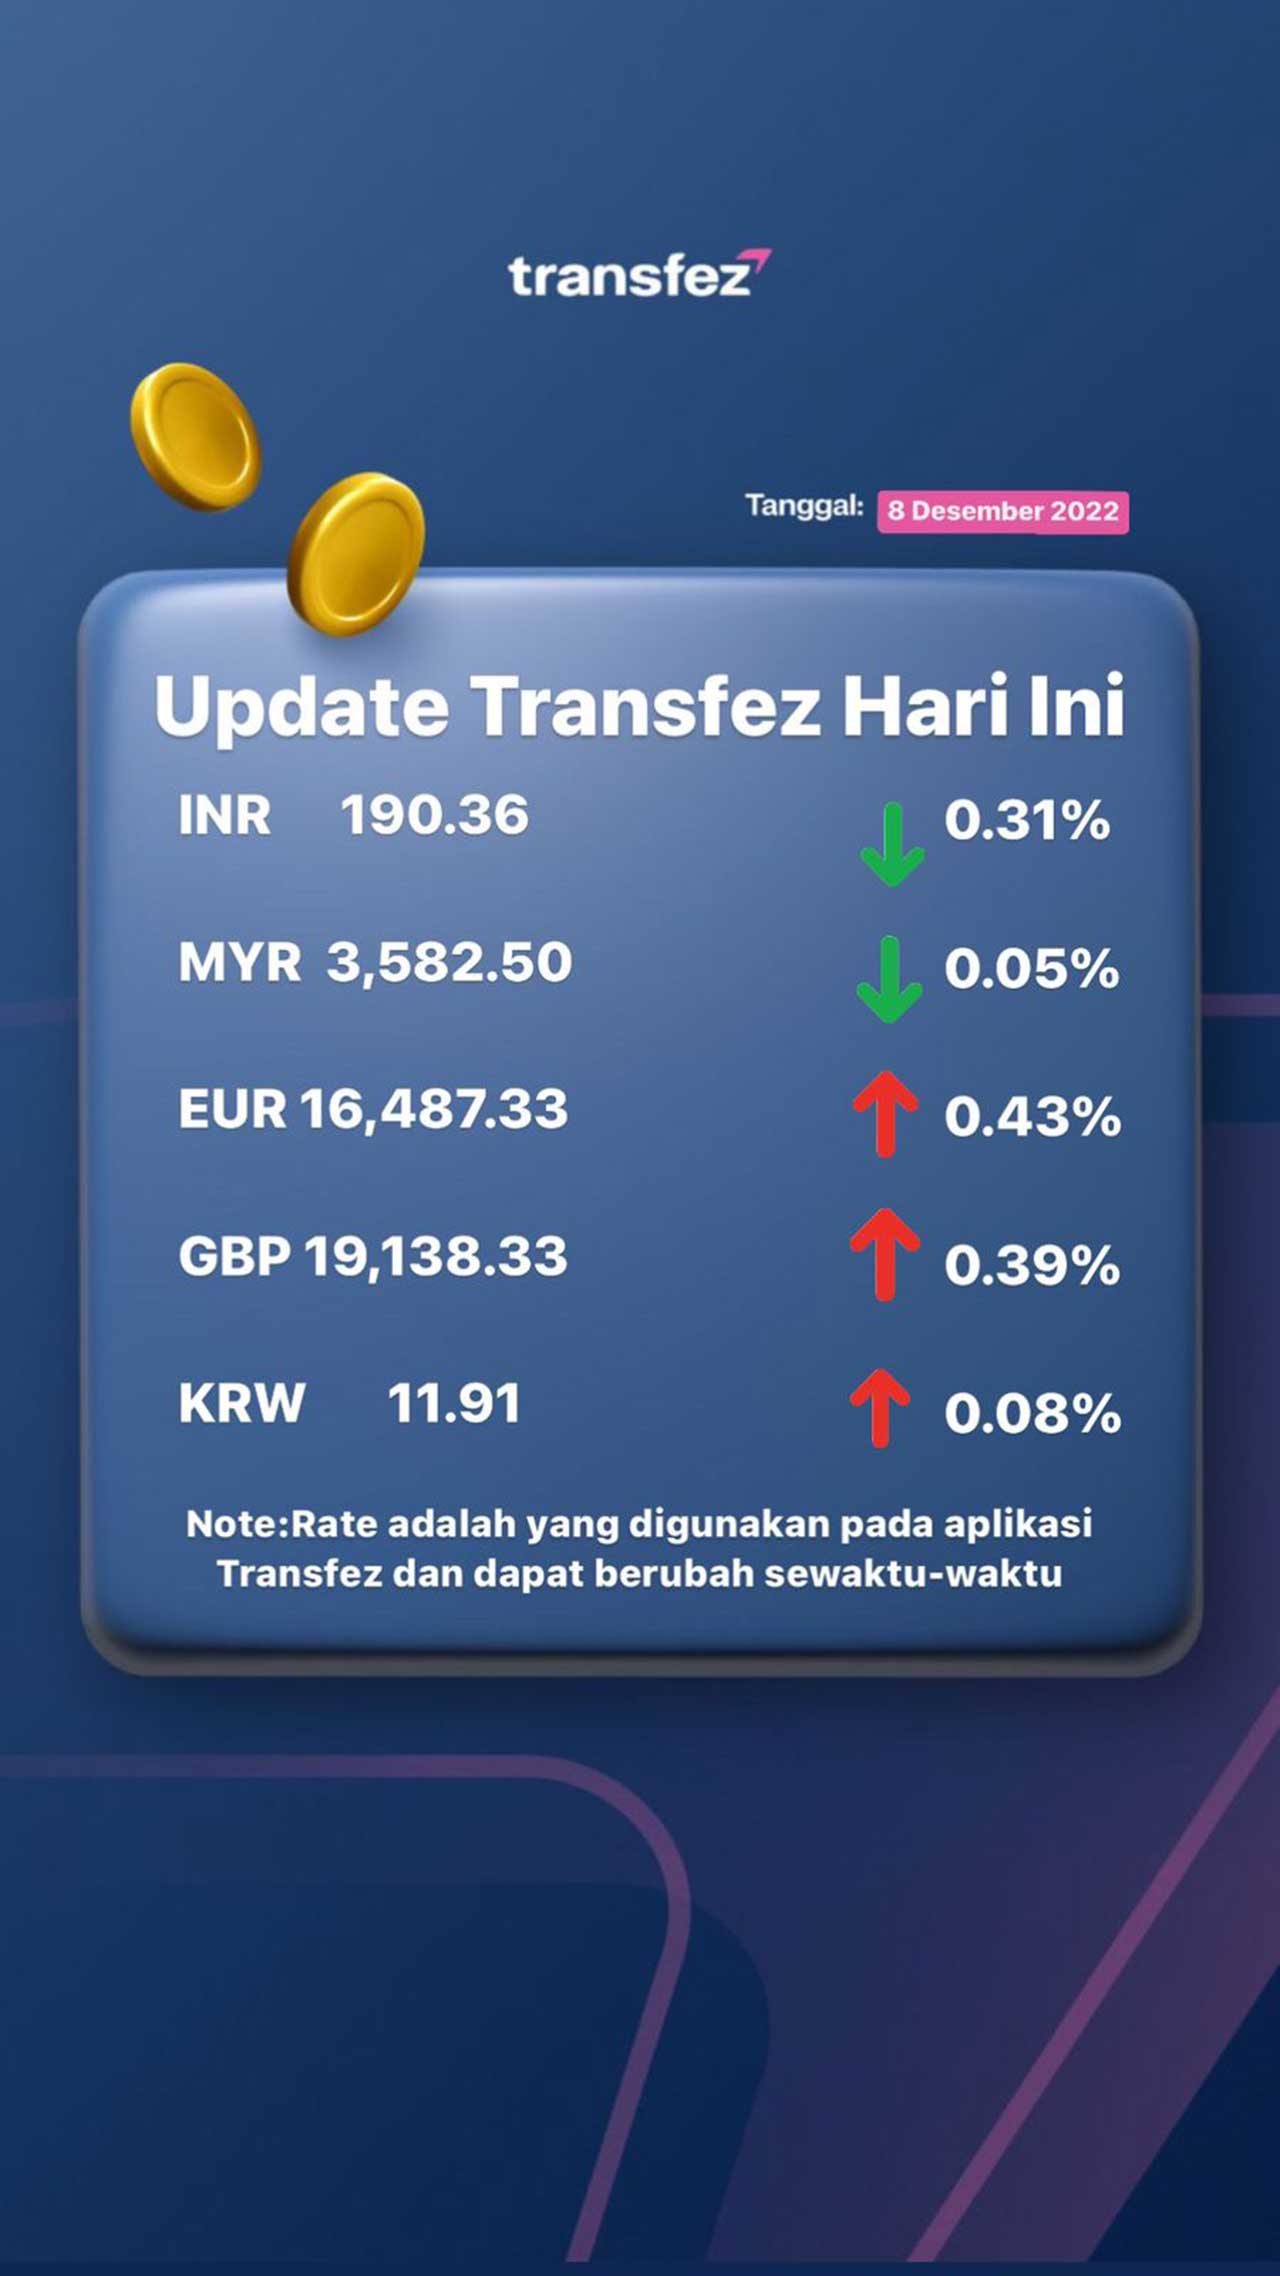 Today's Transfez Rate Update 08 December 2022